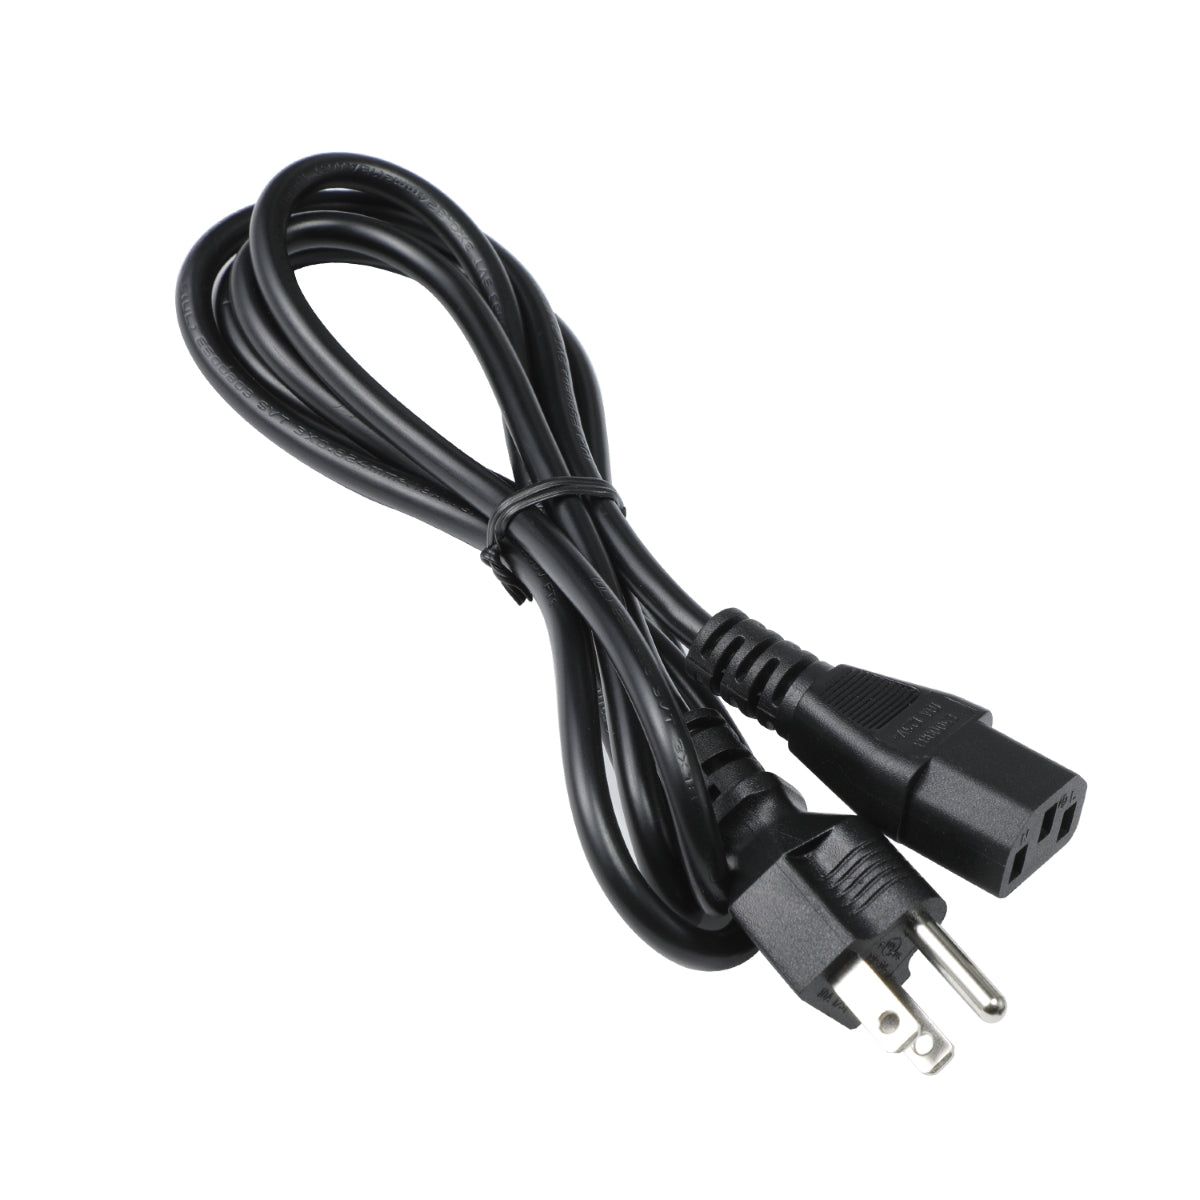 Power Cord for LG 27UD58P-B Monitor TV.